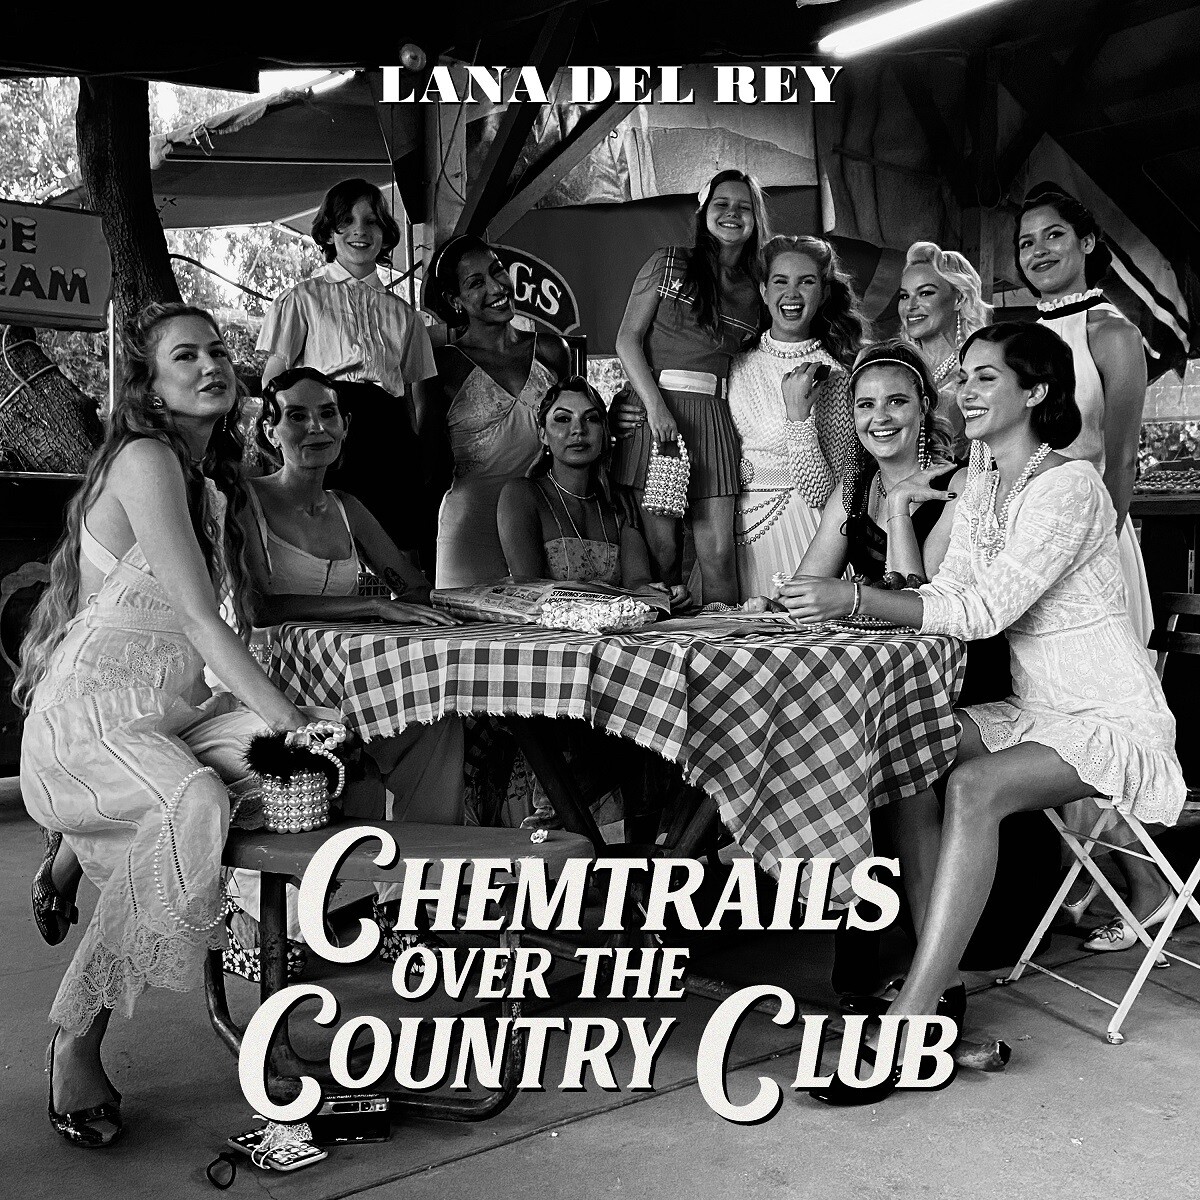 Lana Del Rey "Chemtrails Over The Country Club"